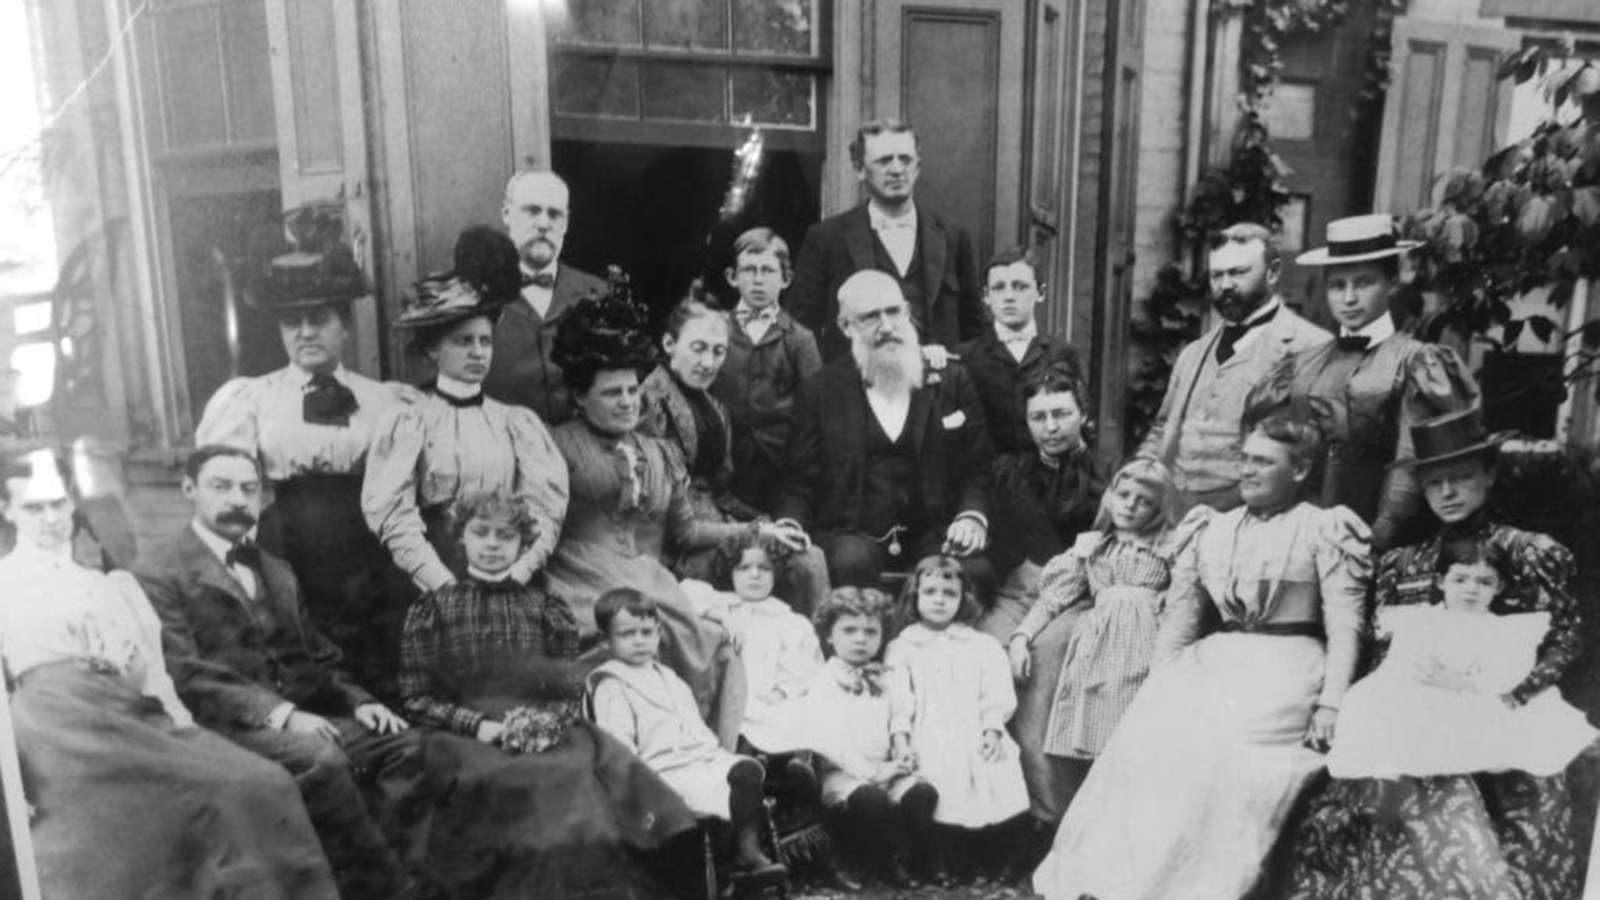 Image of the Sayre Family